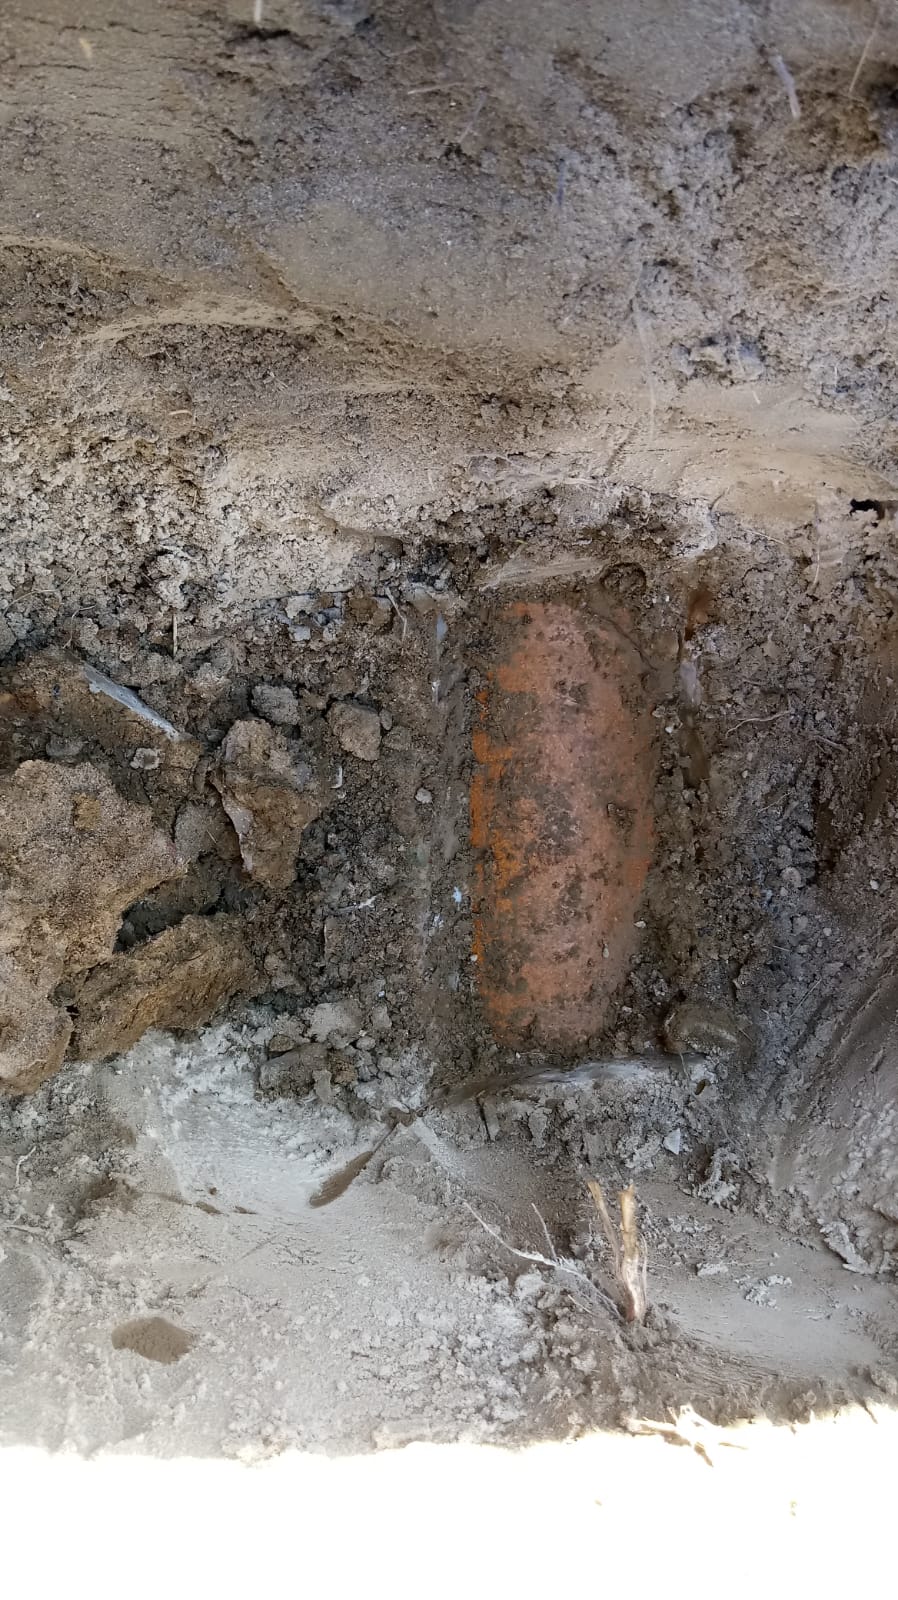 Outlet pipe from a Septic Tank